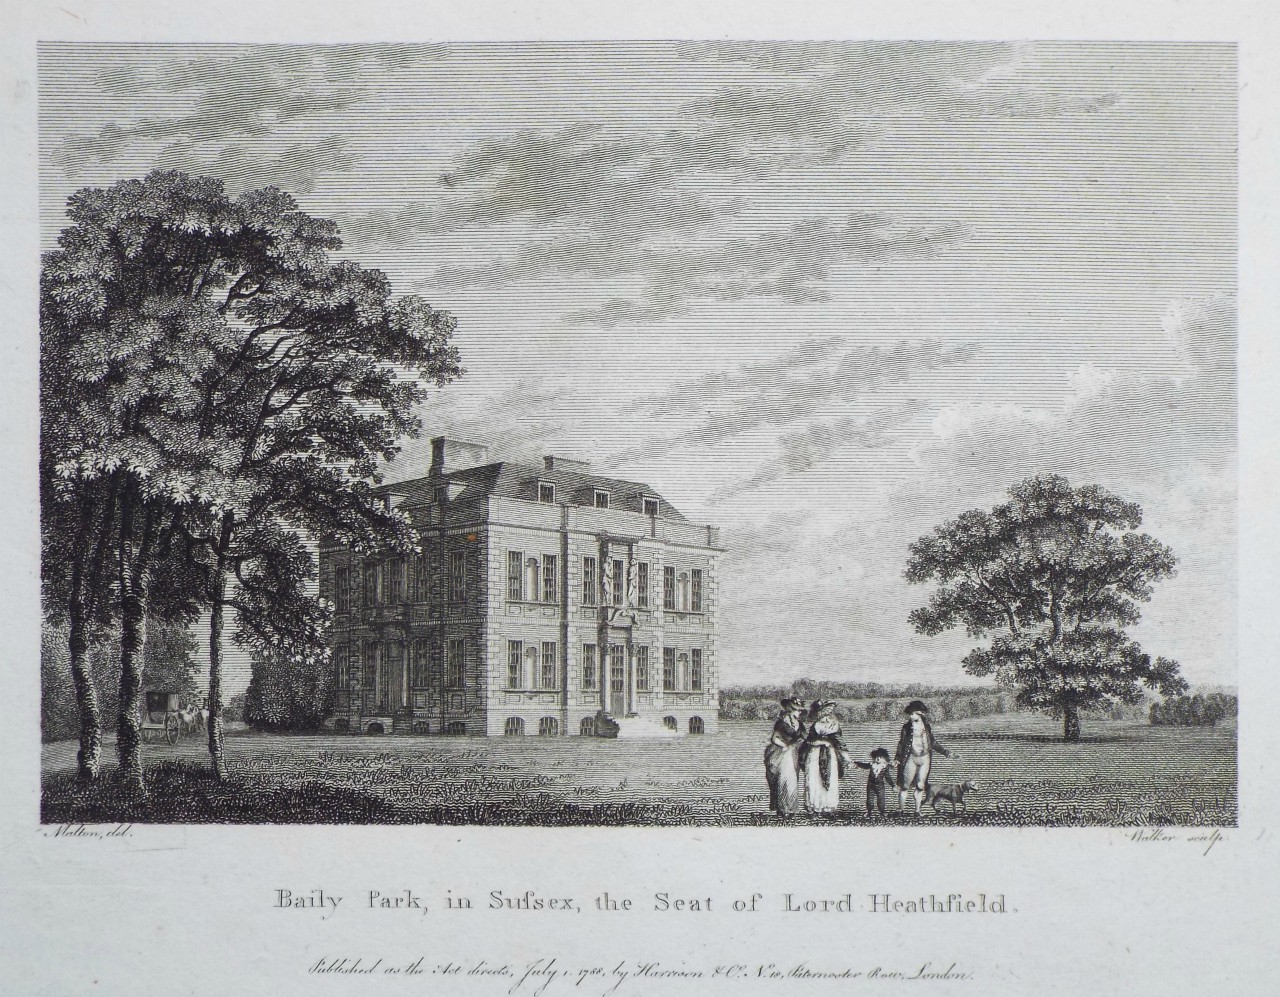 Print - Baily Park, in Sussex, the Seat of Lord Heathfield. - 